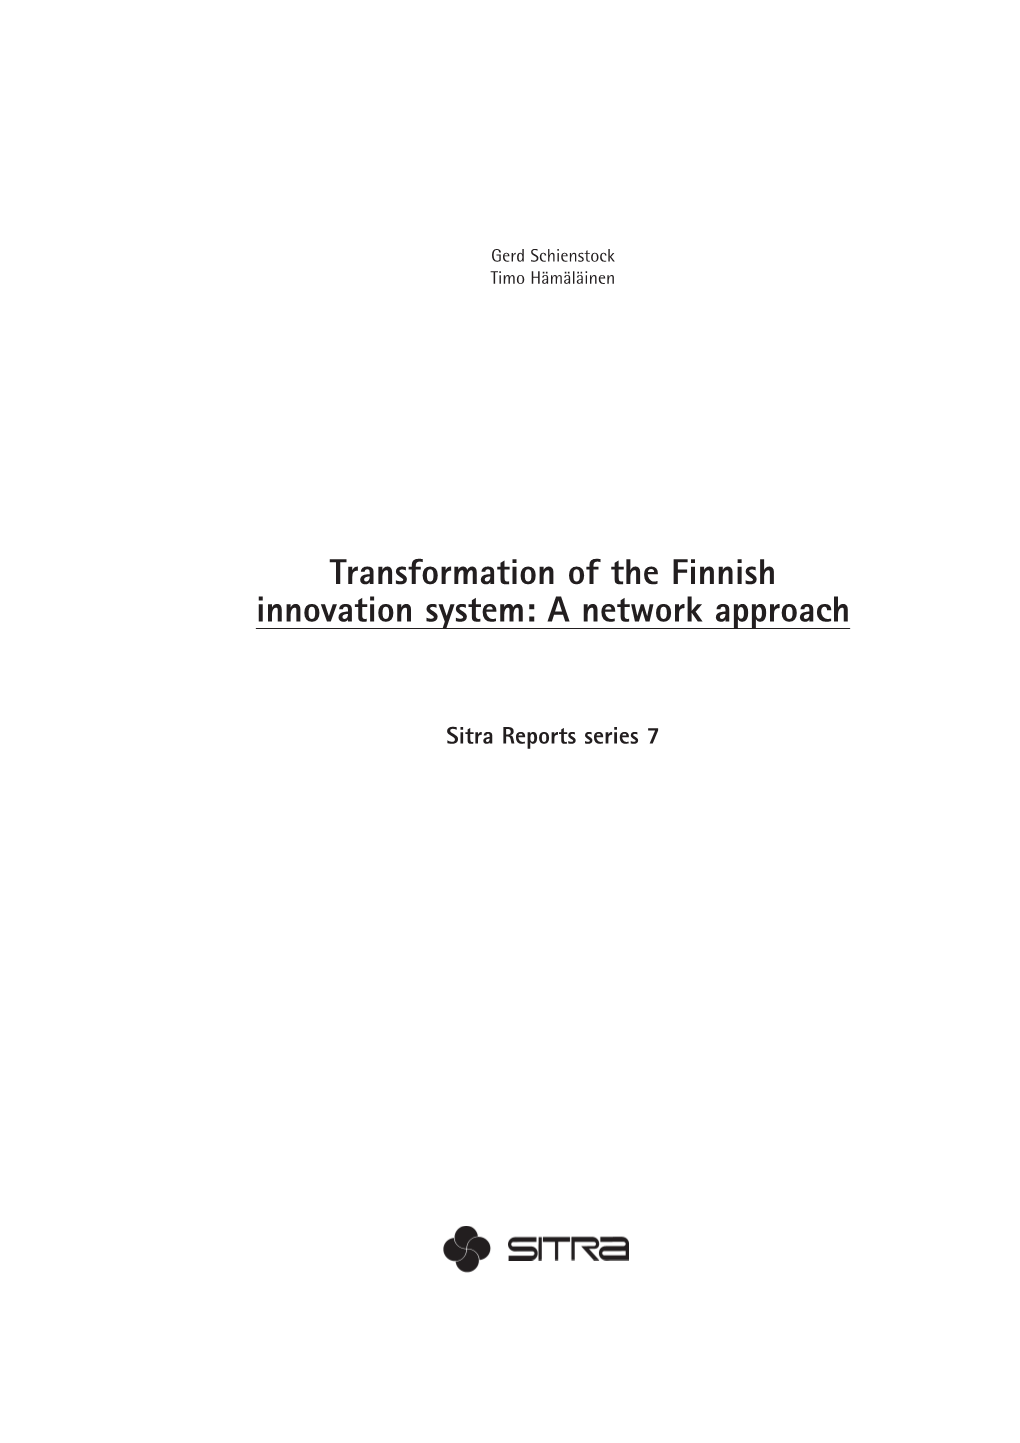 Transformation of the Finnish Innovation System: a Network Approach